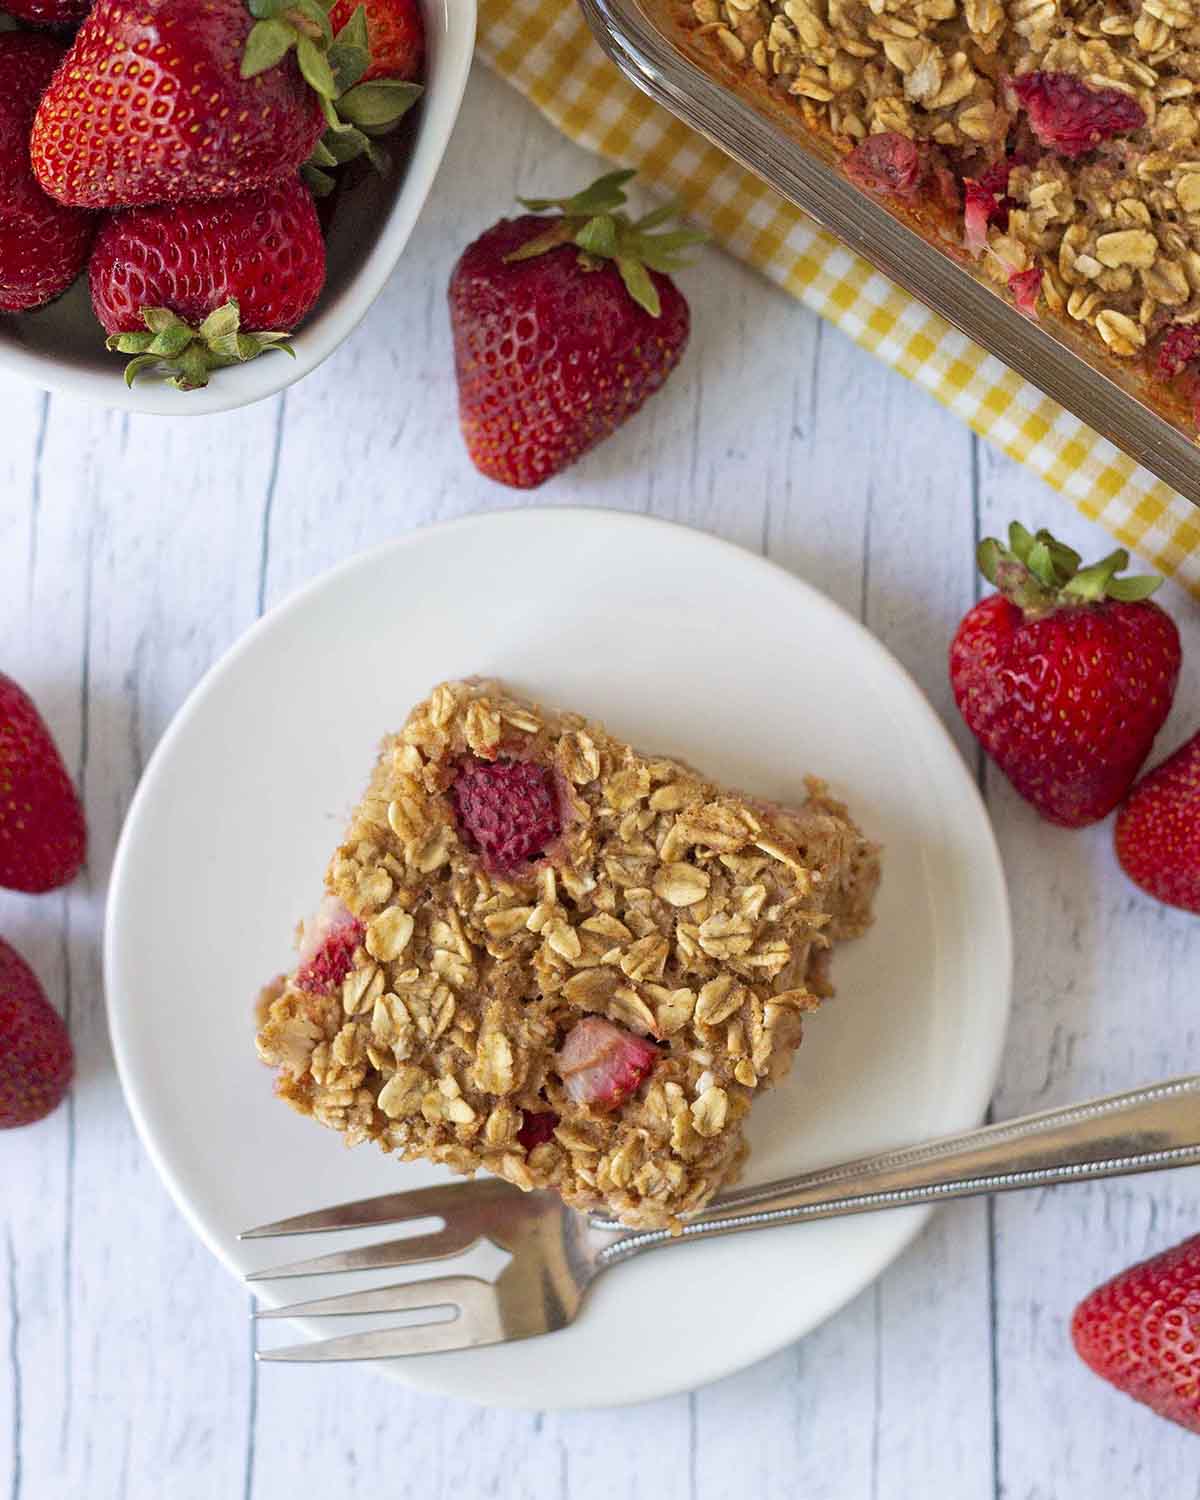 An overhead shot showing a slice of strawberry baked oatmeal on a plate, fresh strawberries are around the plate.